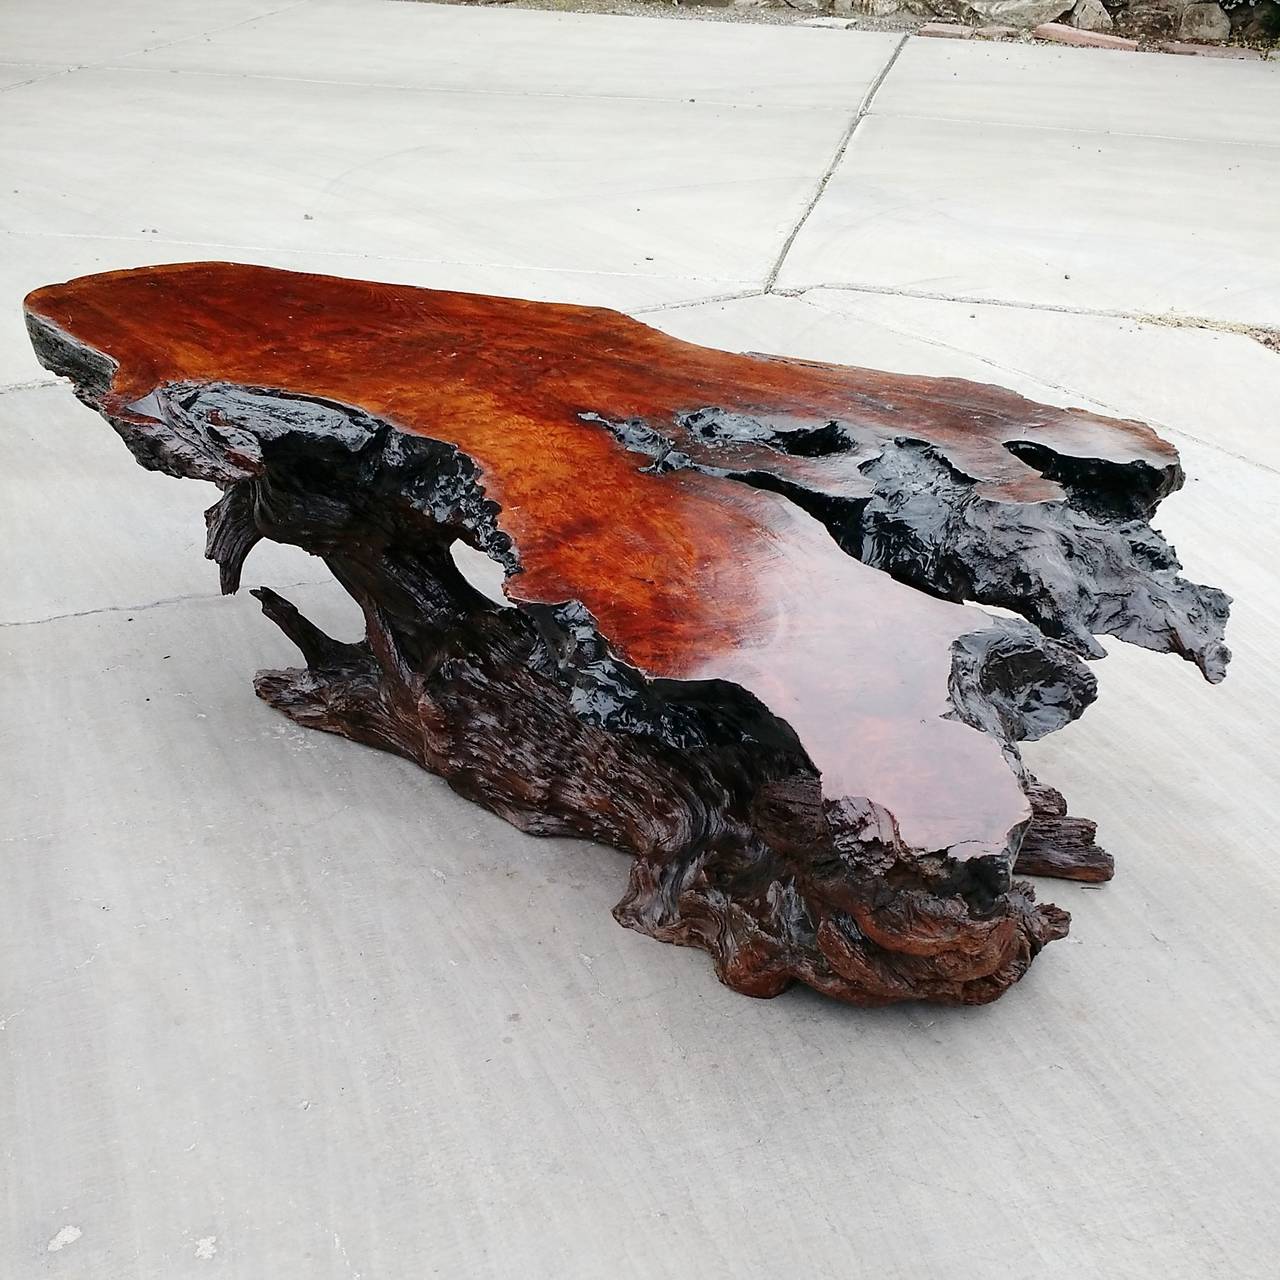 An exceptionally artful and large vintage burl wood coffee table with natural stump base.
Top and base mate together perfectly in design and function.
High gloss finish.
Hidden pegs hold top in place (removable to ease in moving).
Solid, stabile